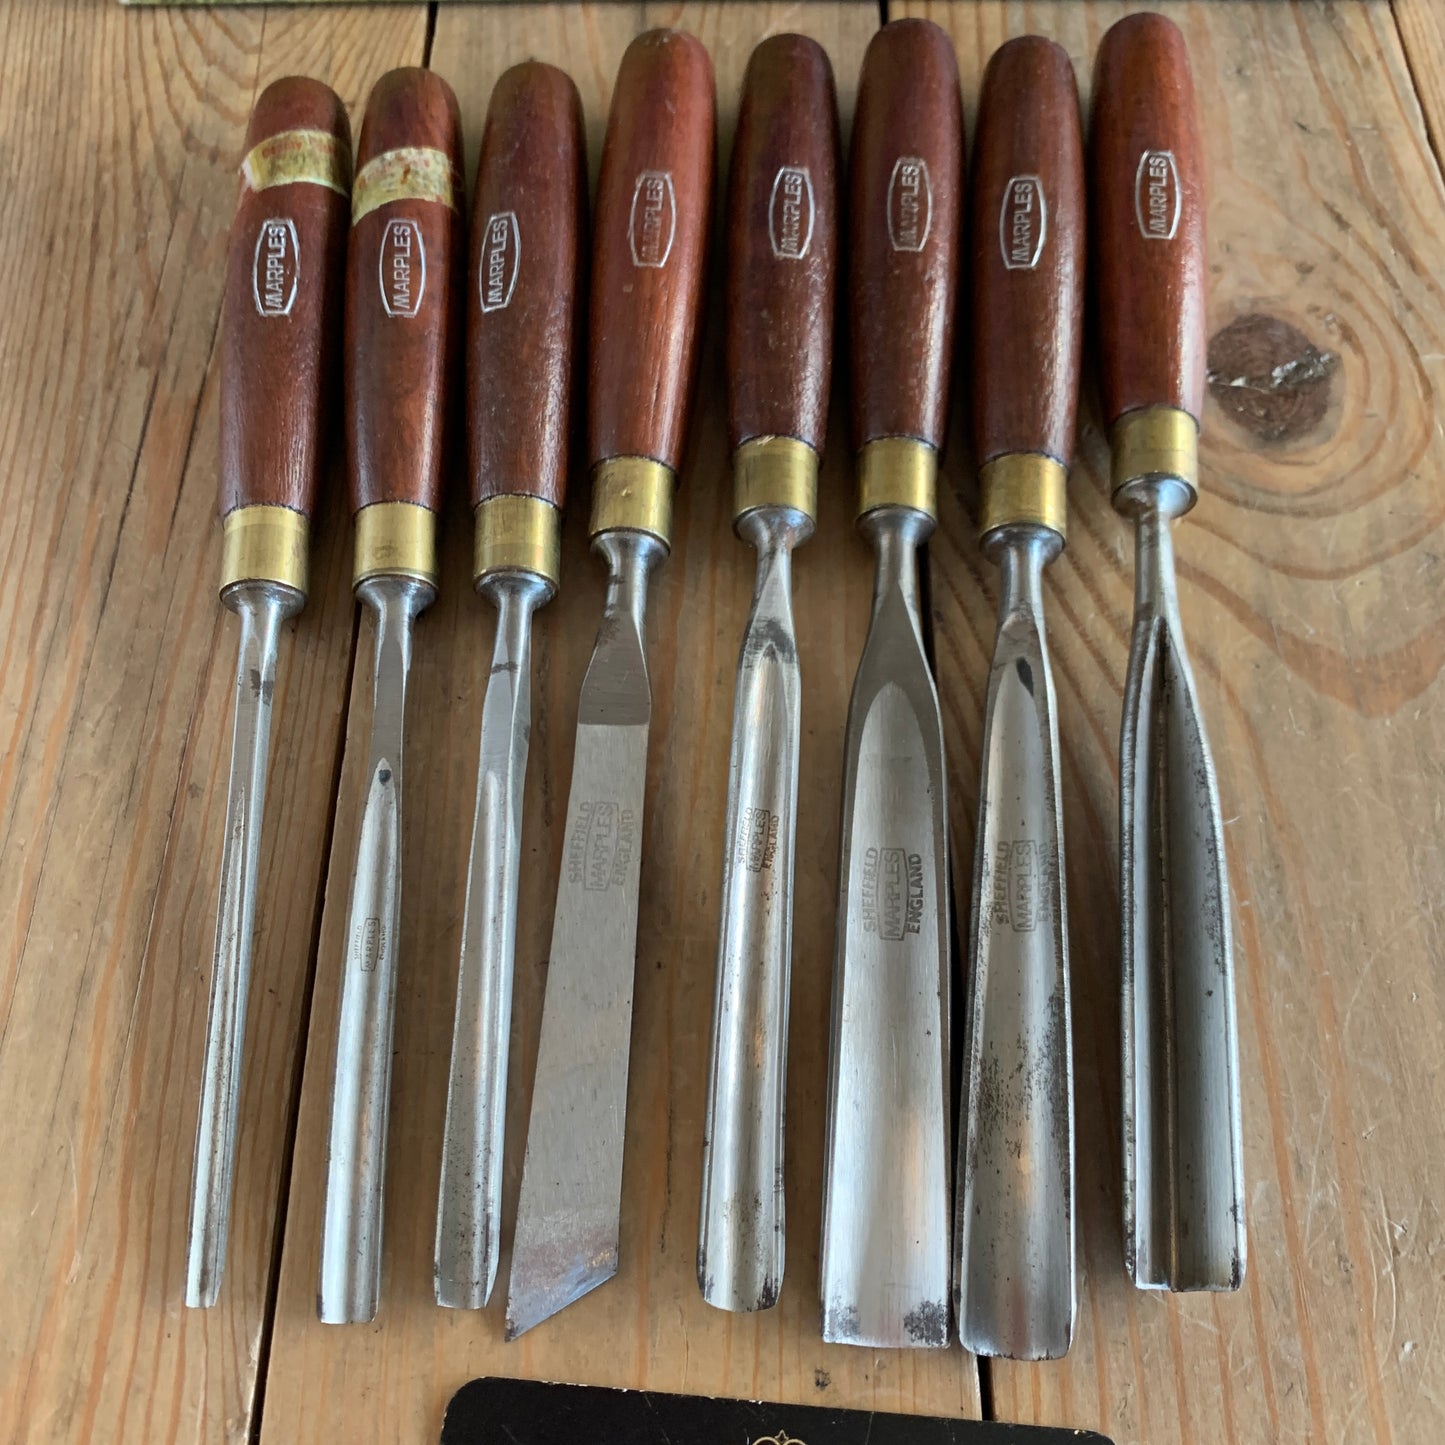 SOLD Vintage set of 6  + 2 MARPLES England Carving CHISELS No:M60A in box T8827